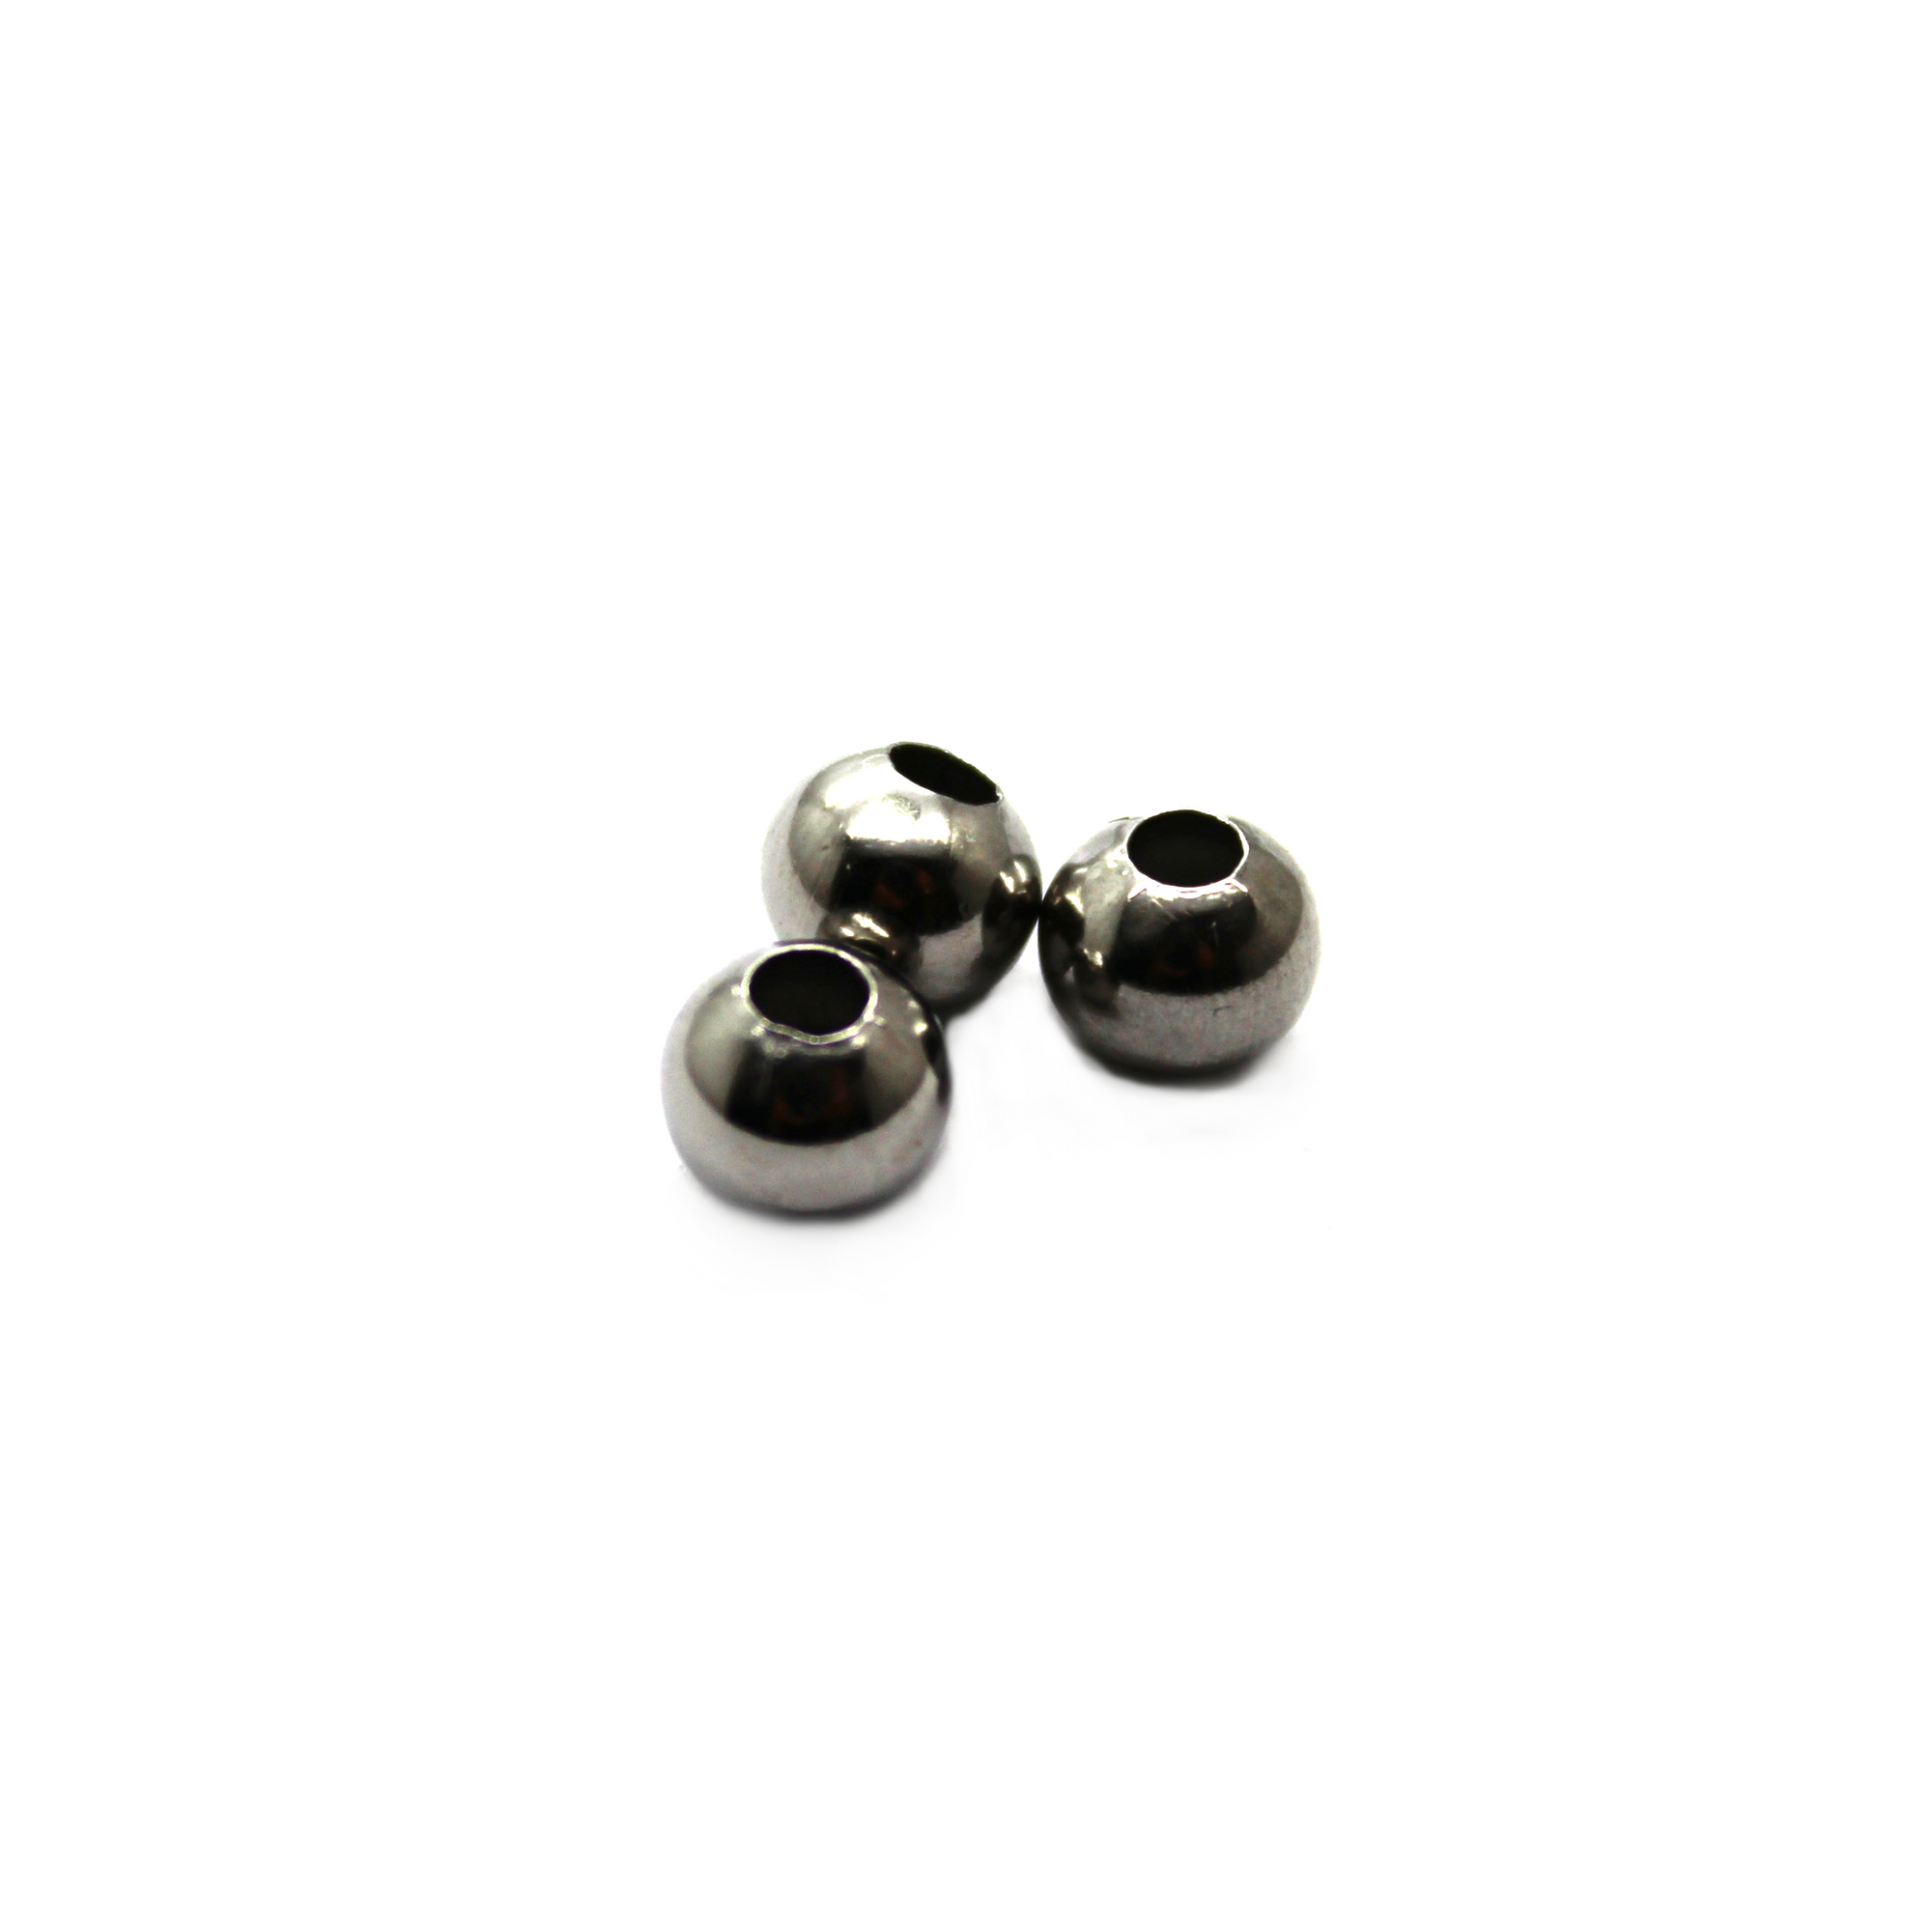 Plain Round Spacer, Stainless Steel, 2.1mm x 2.9mm x 1mm, 26 pcs/bag